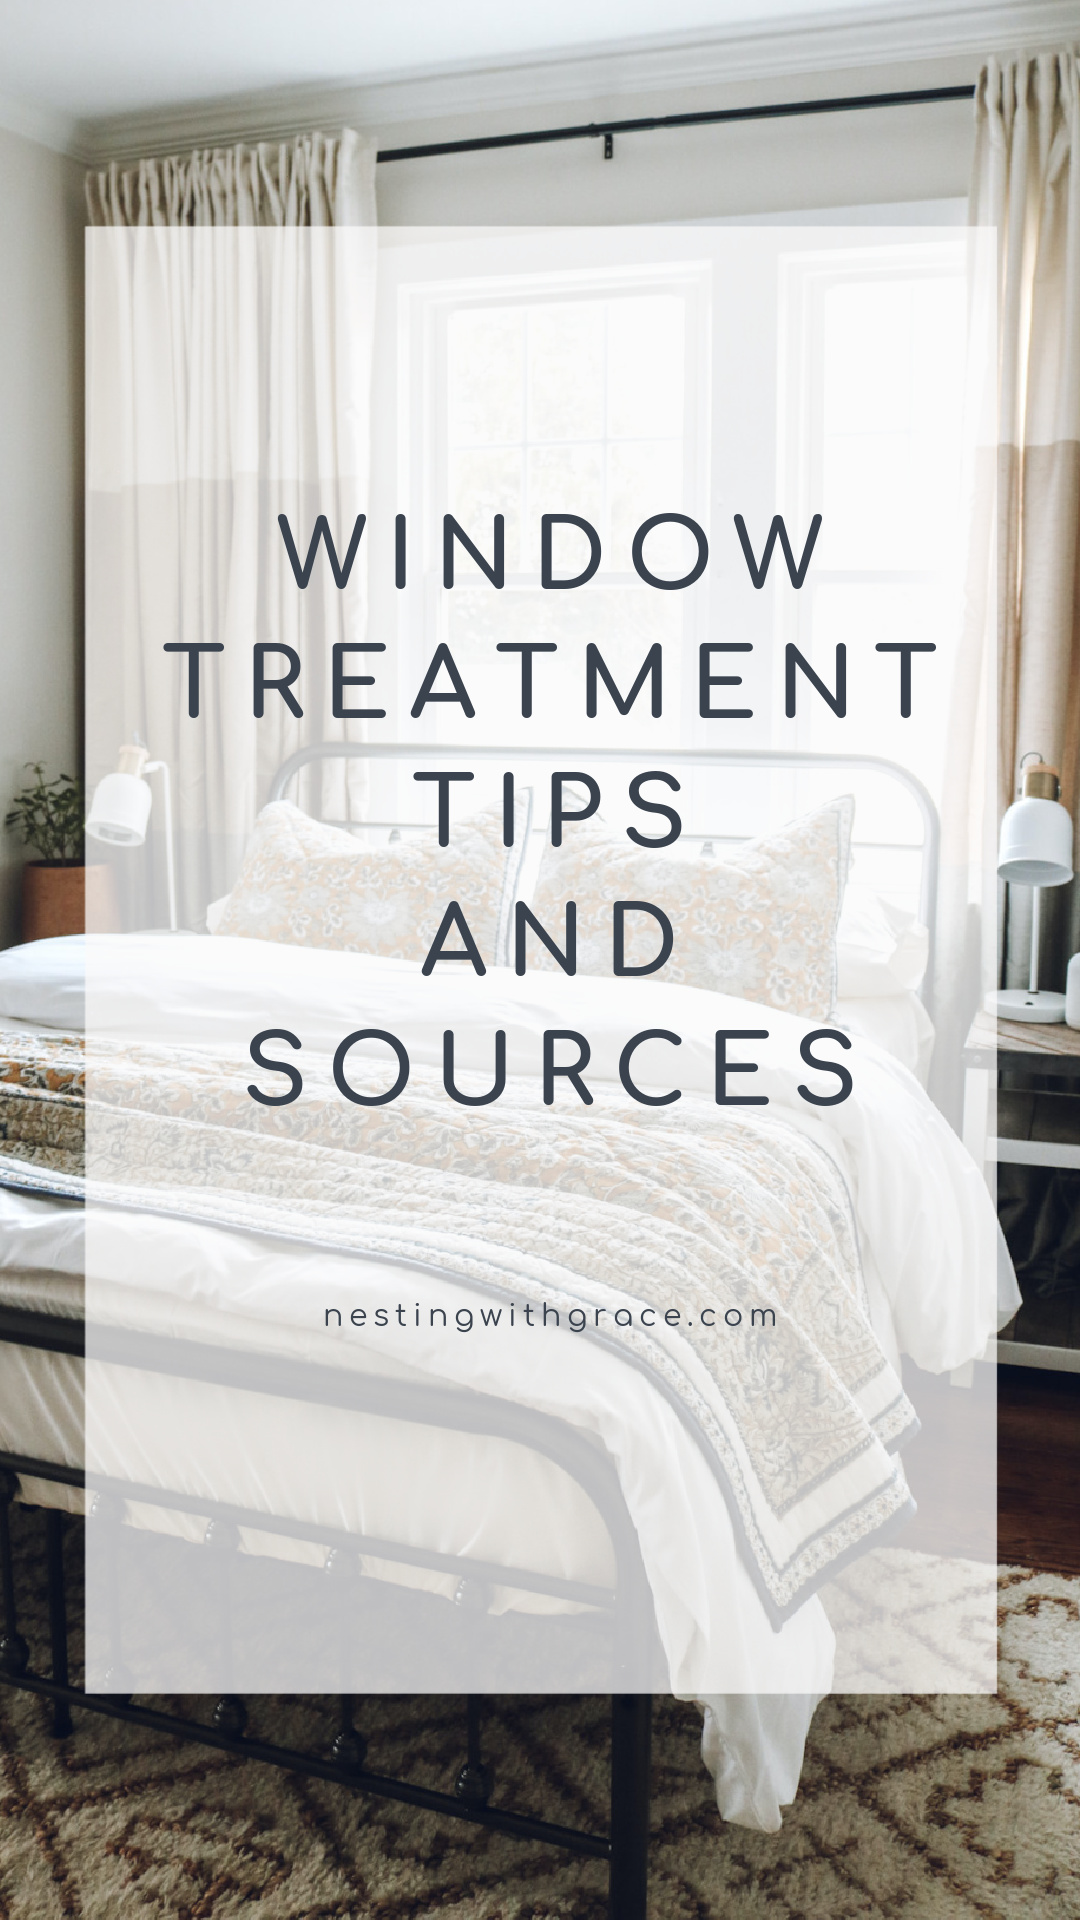 WINDOW TREATMENT TIPS AND SOURCES